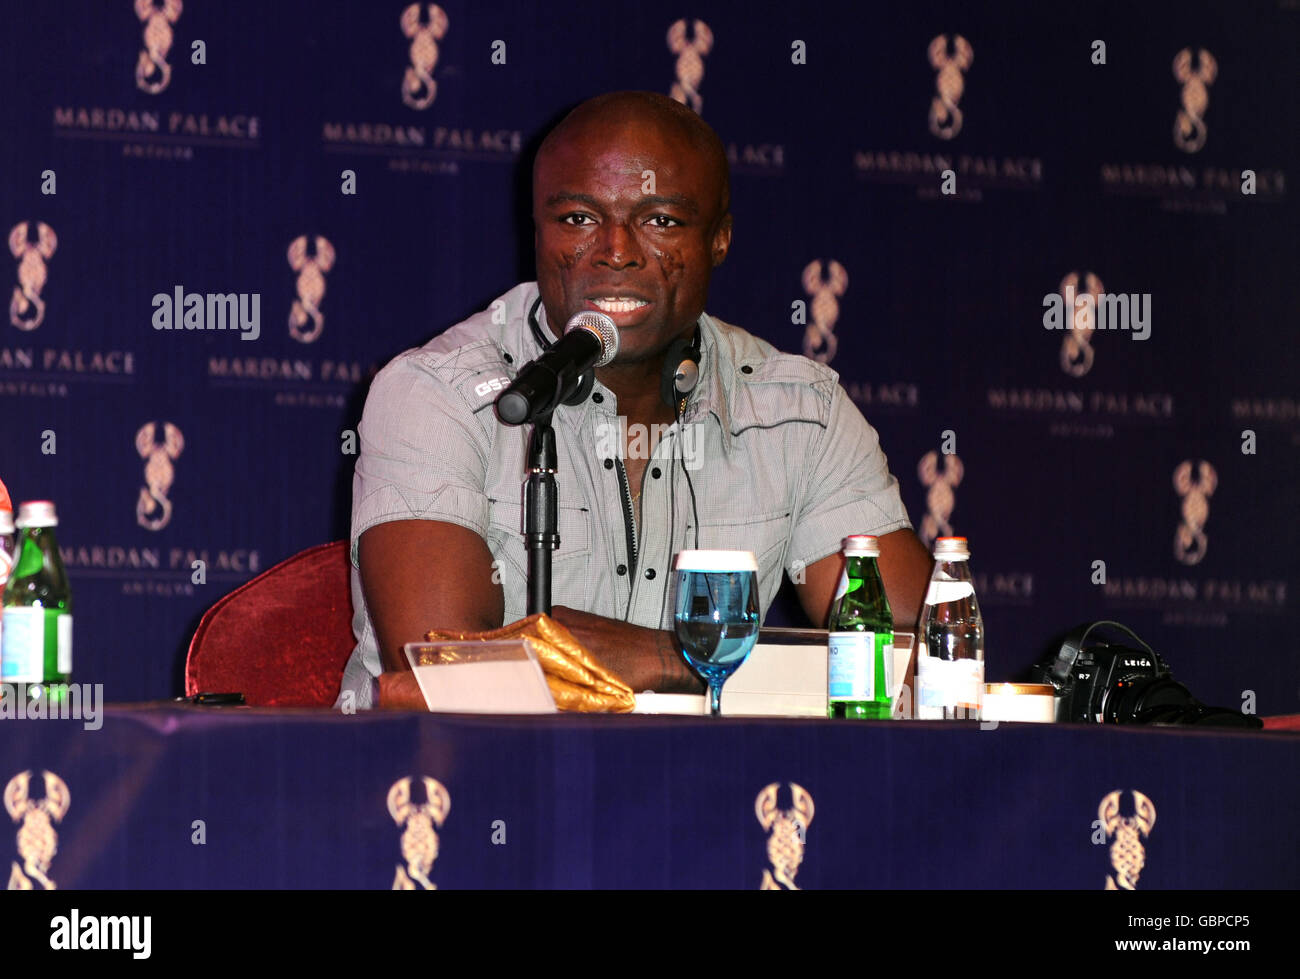 Seal during a press conference ahead of the opening party of the Mardan Palace hotel in Antalya, Turkey. Stock Photo